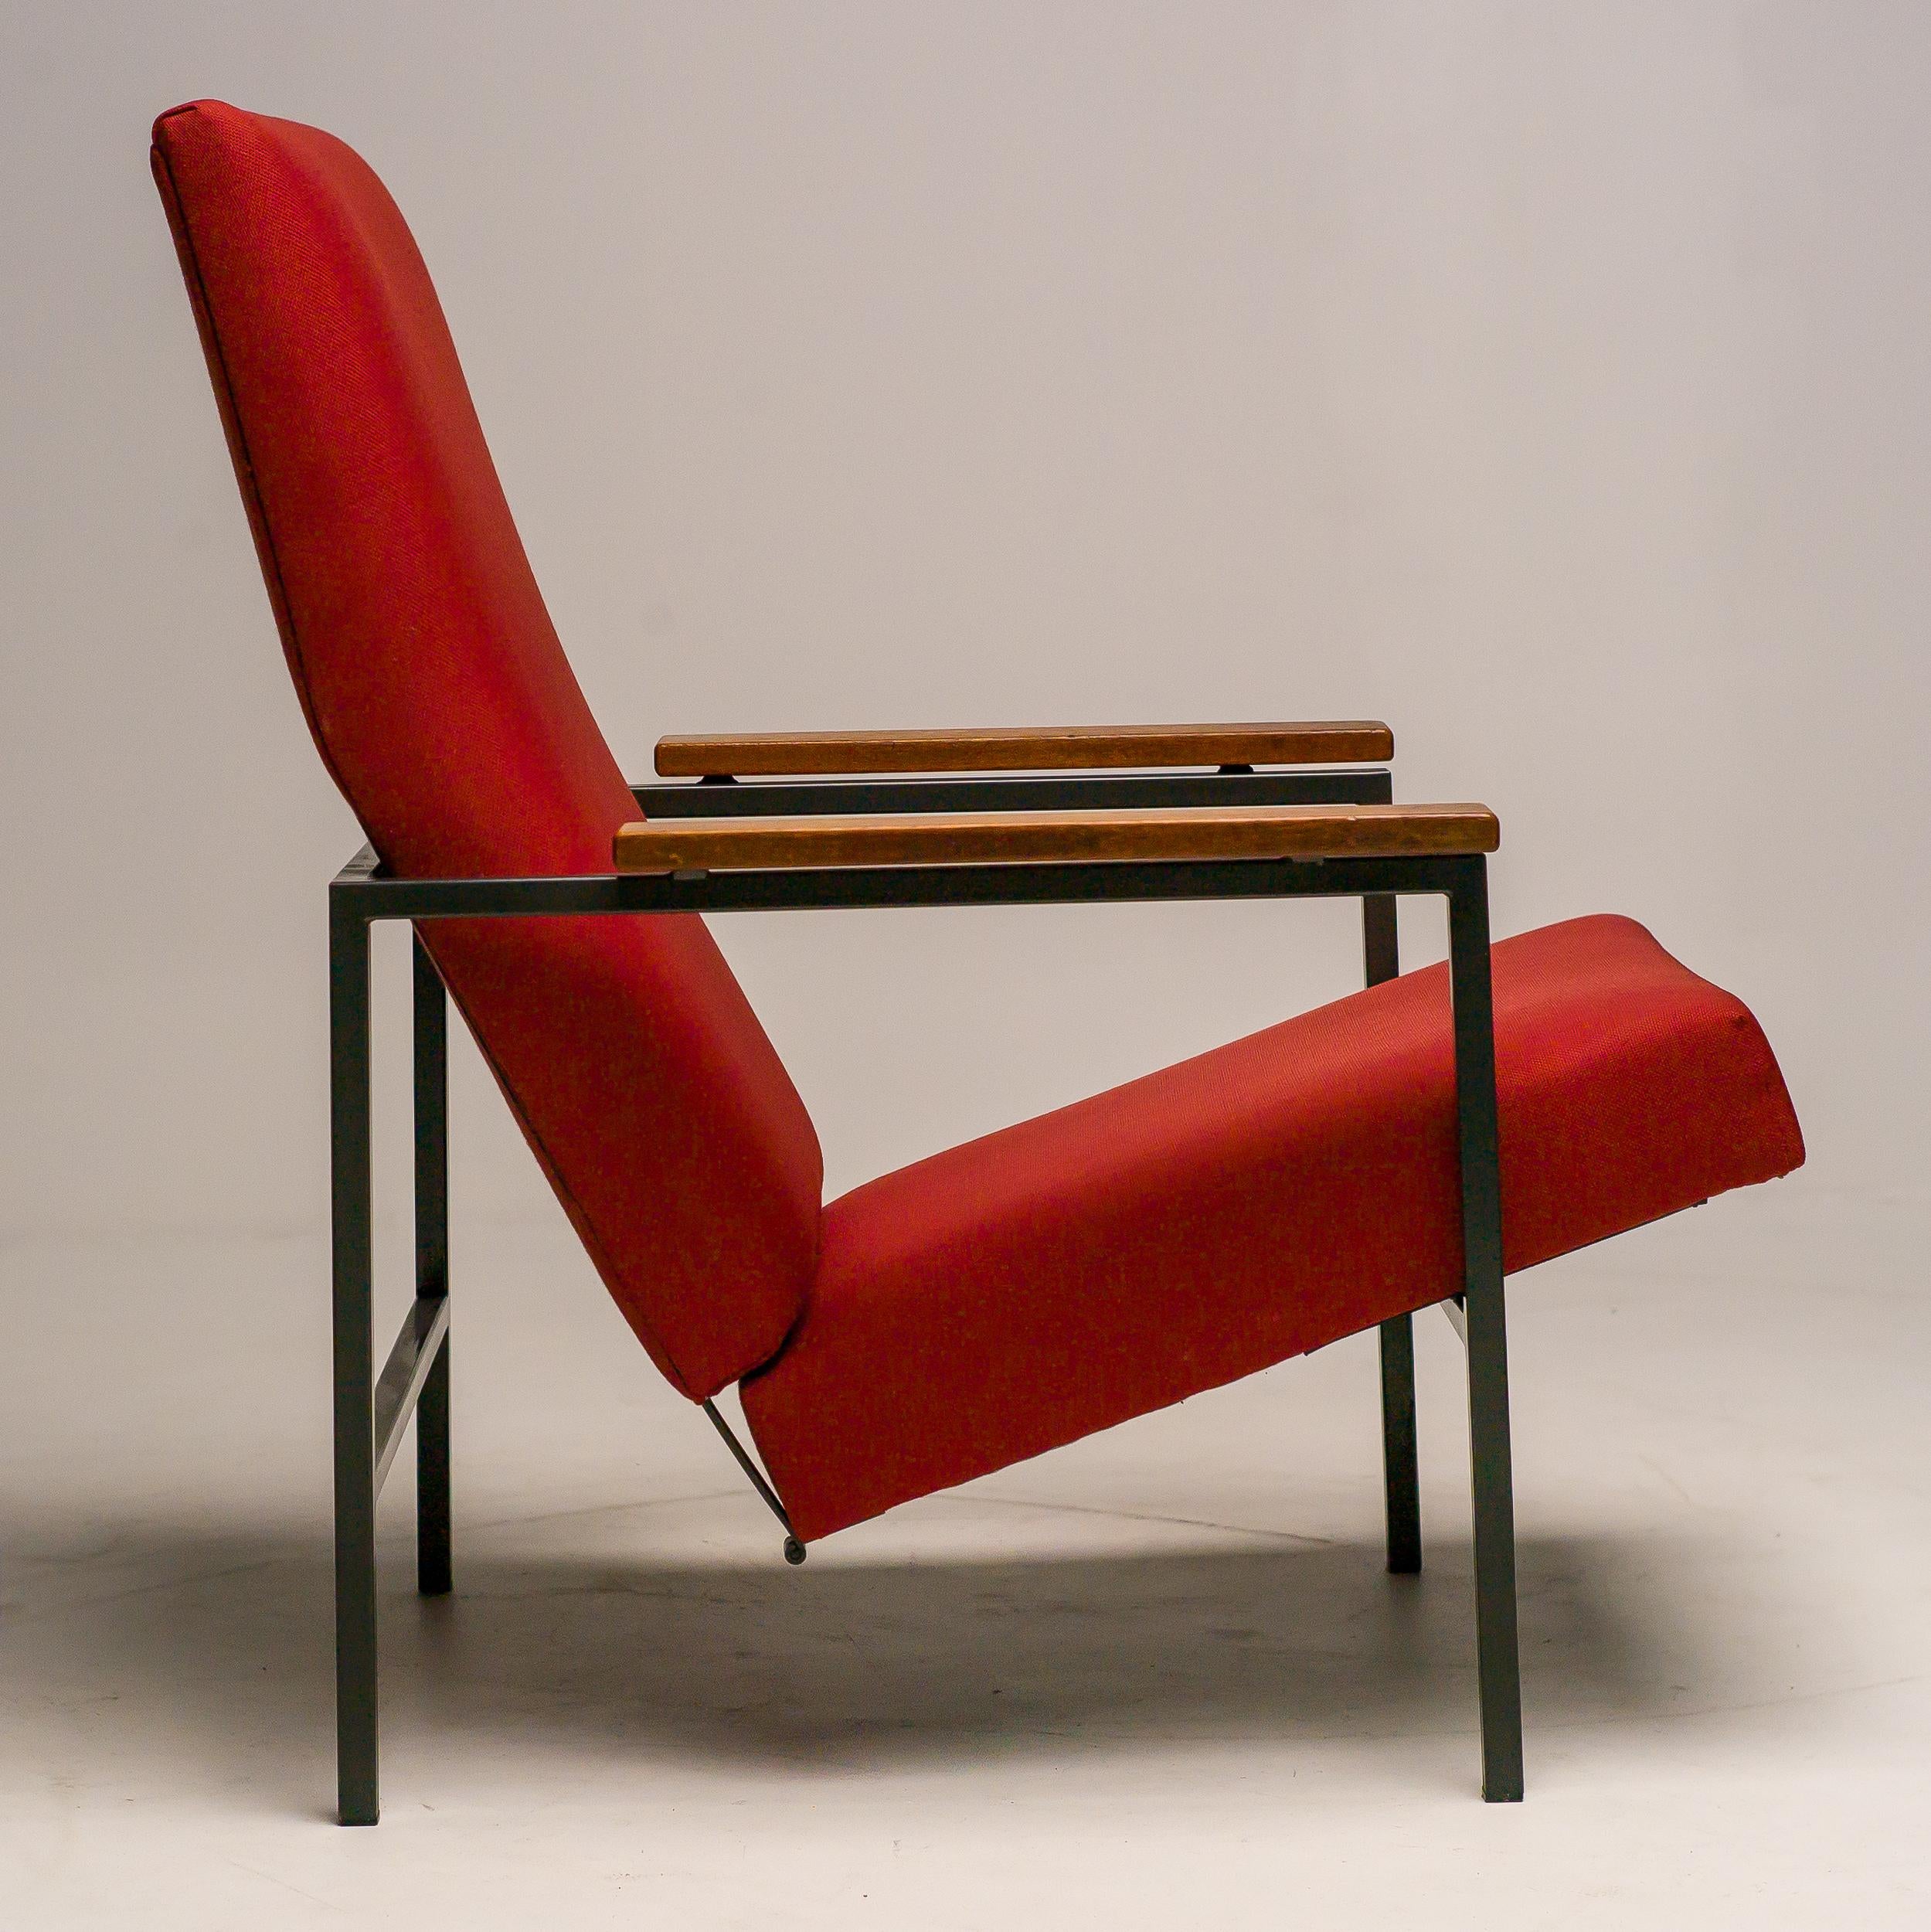 Reclinable Lotus lounge chair designed by Rob Parry for Gelderland.
Rob Parry (The Hague, 1925-2023) was educated at the Royal Academy of Art in The Hague. His most important teachers were Cor Alons, Paul Schuitema and Gerrit Rietveld at whose desk